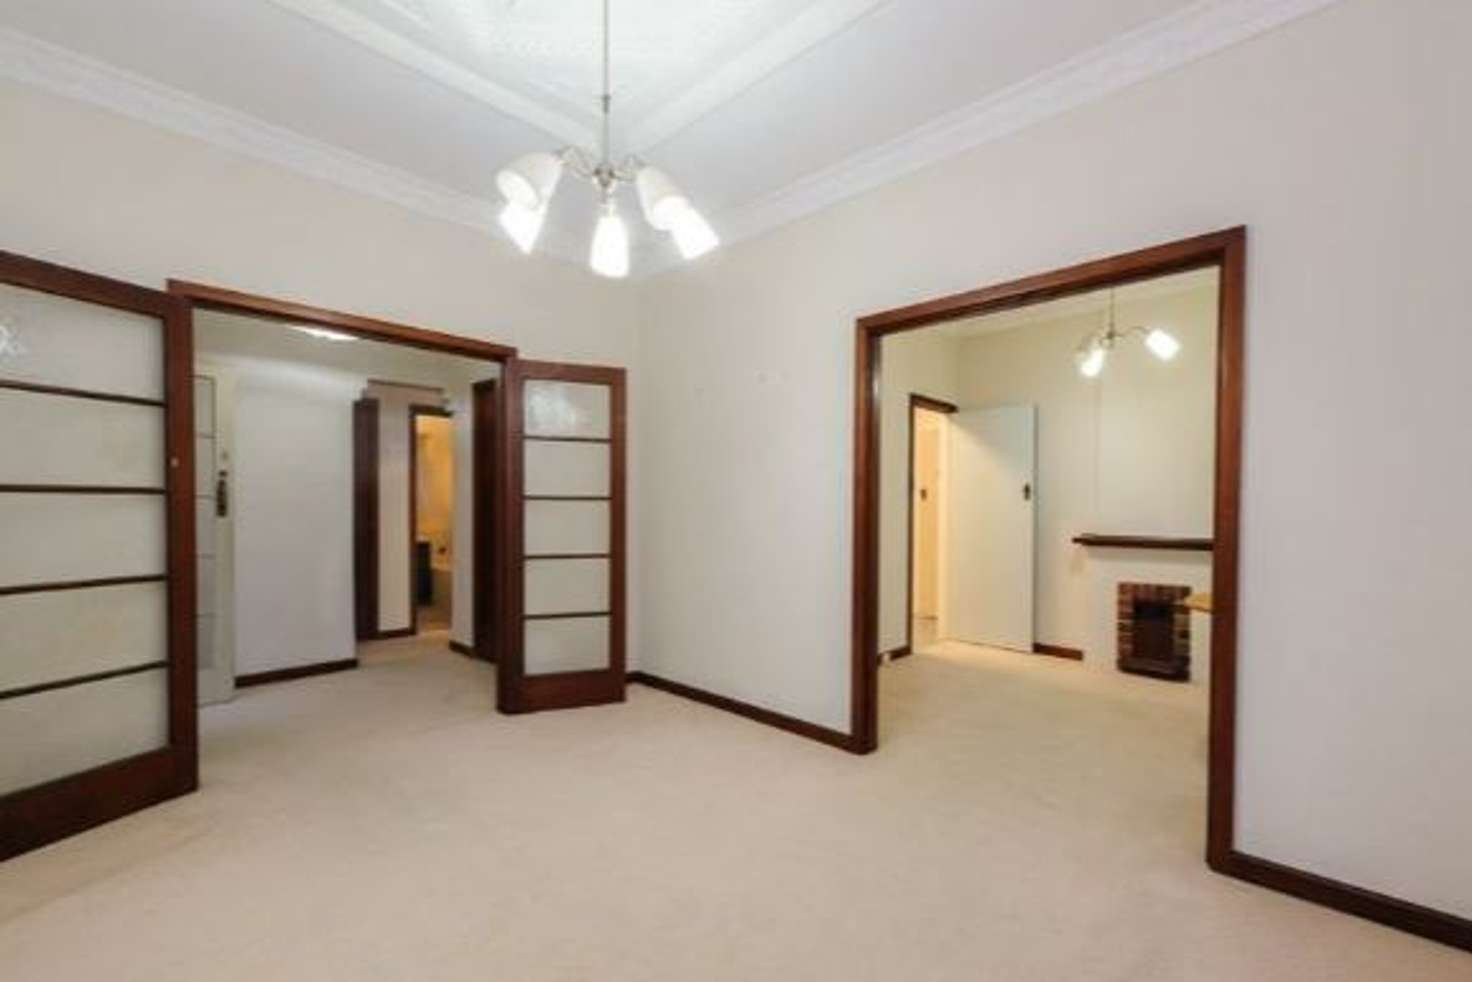 Main view of Homely house listing, 12 Maple Street, Box Hill VIC 3128